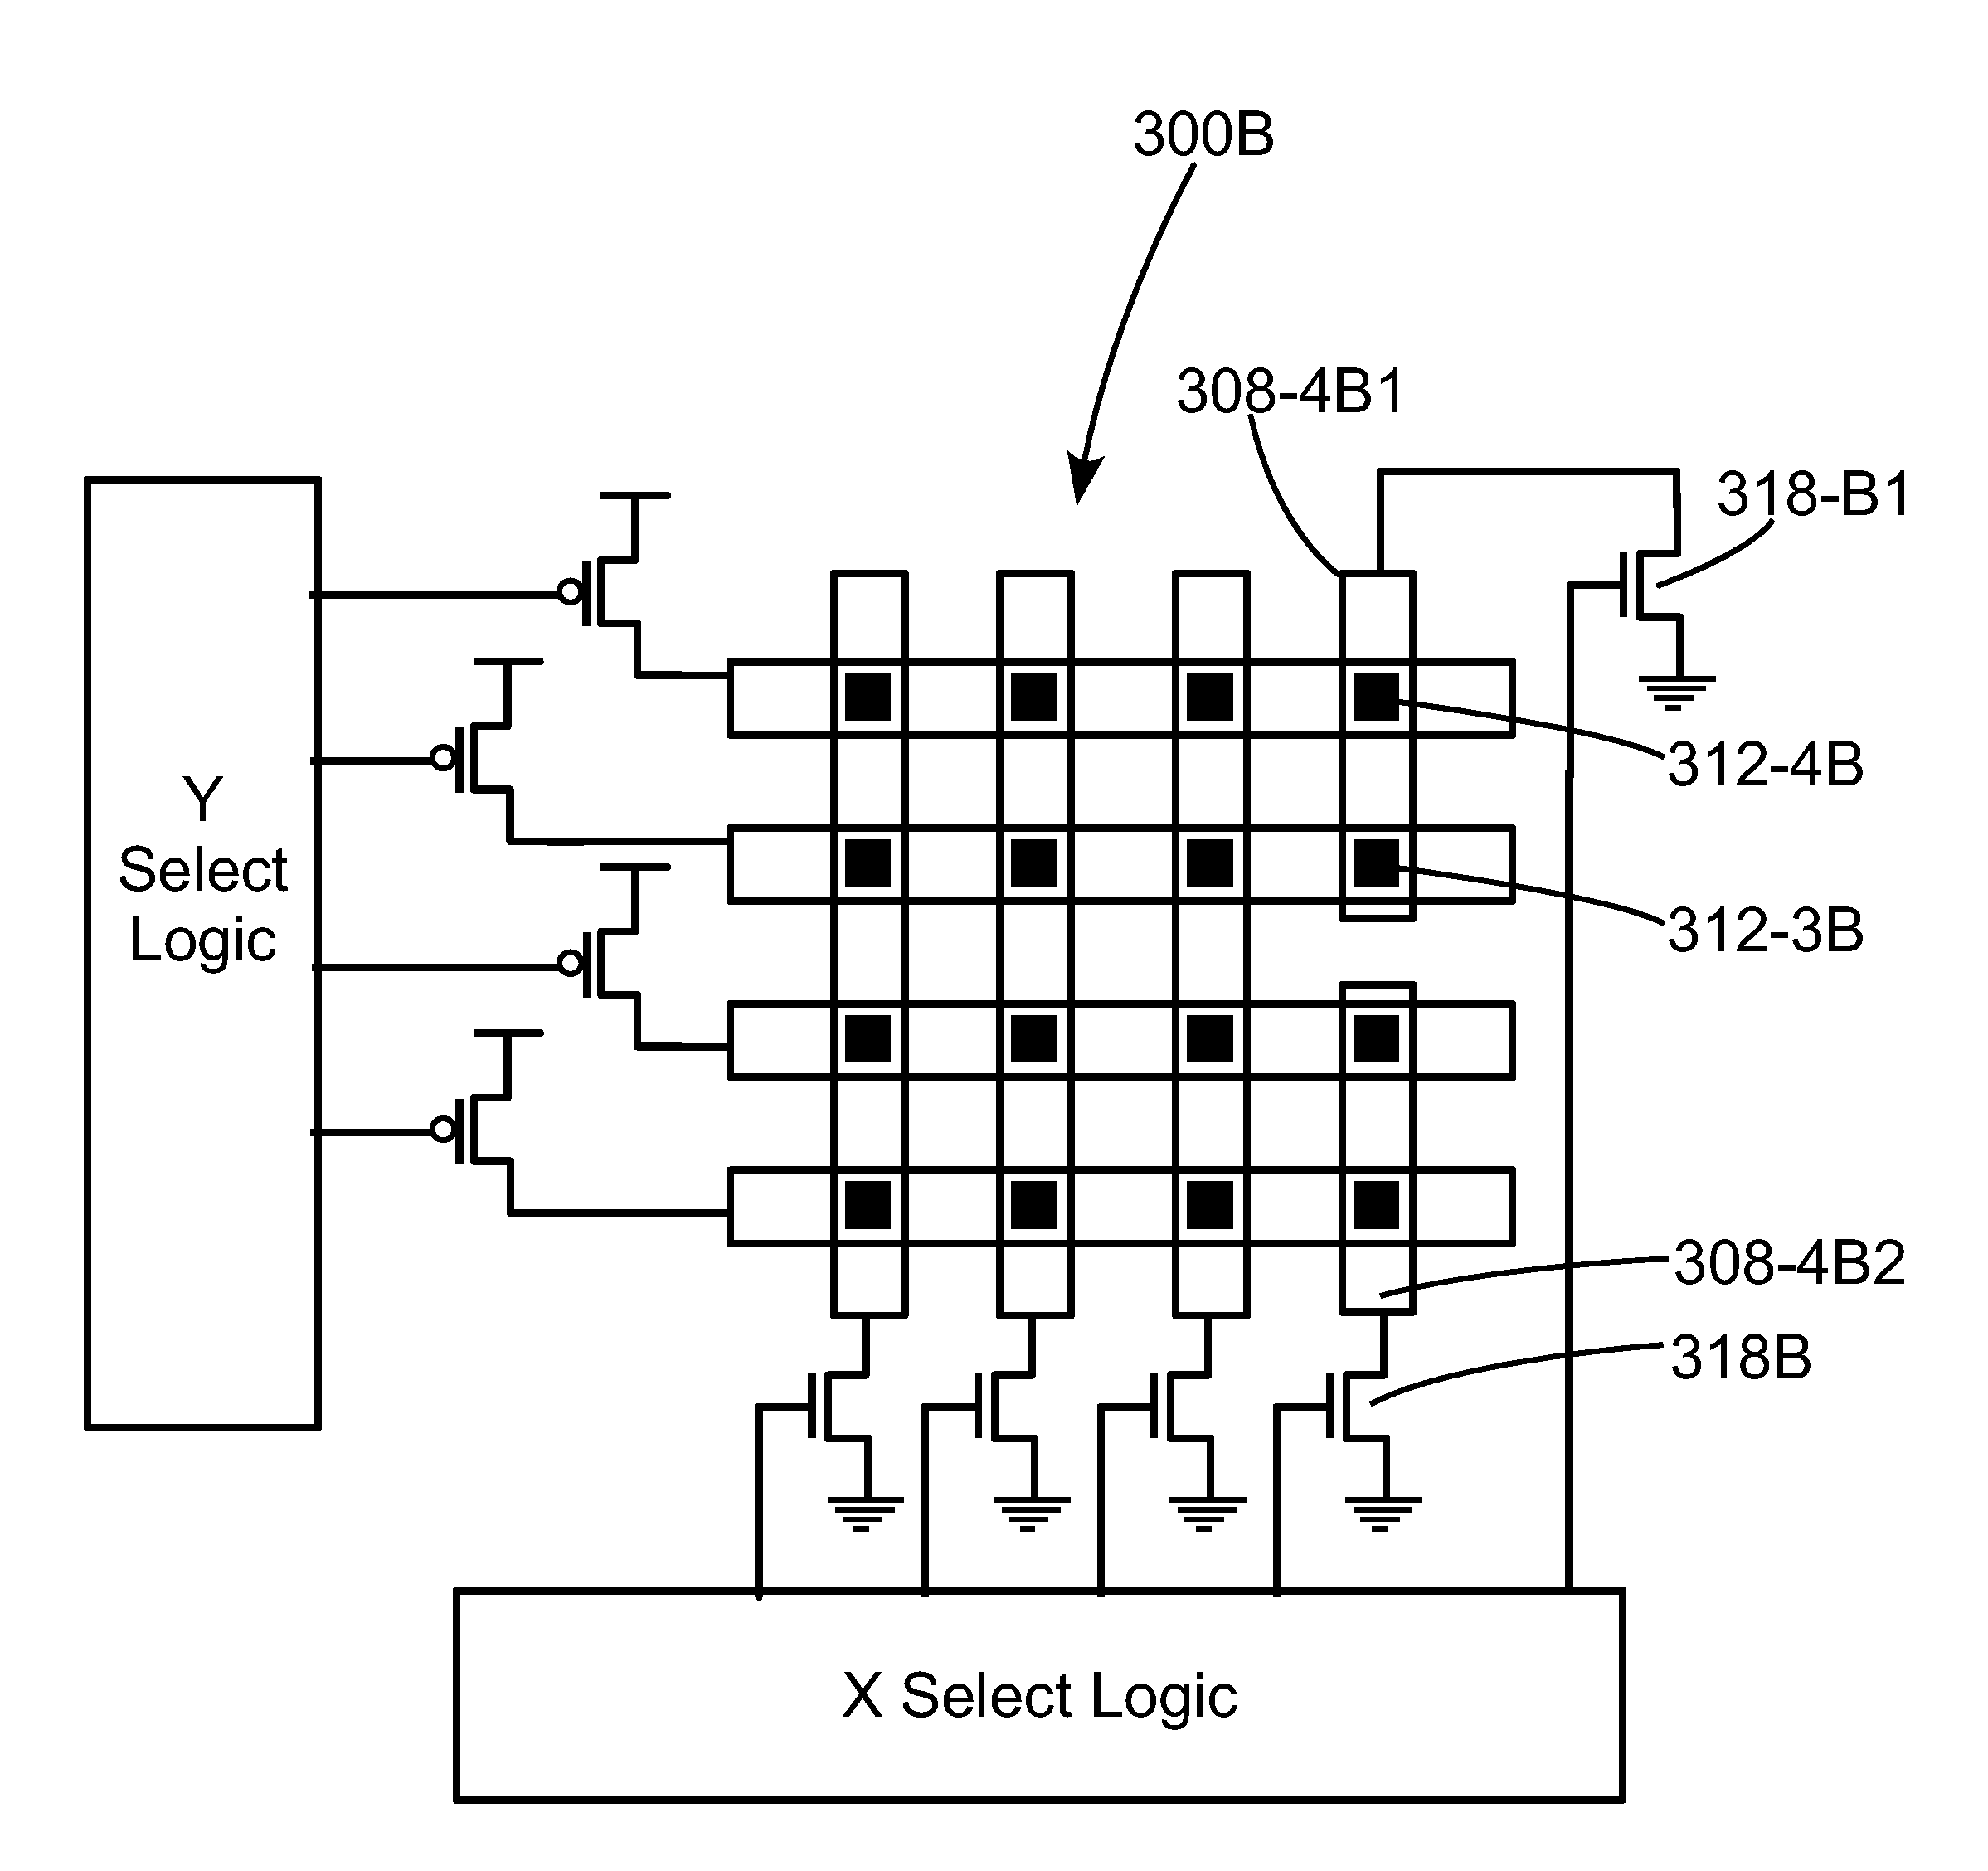 Method for fabrication of a semiconductor device and structure